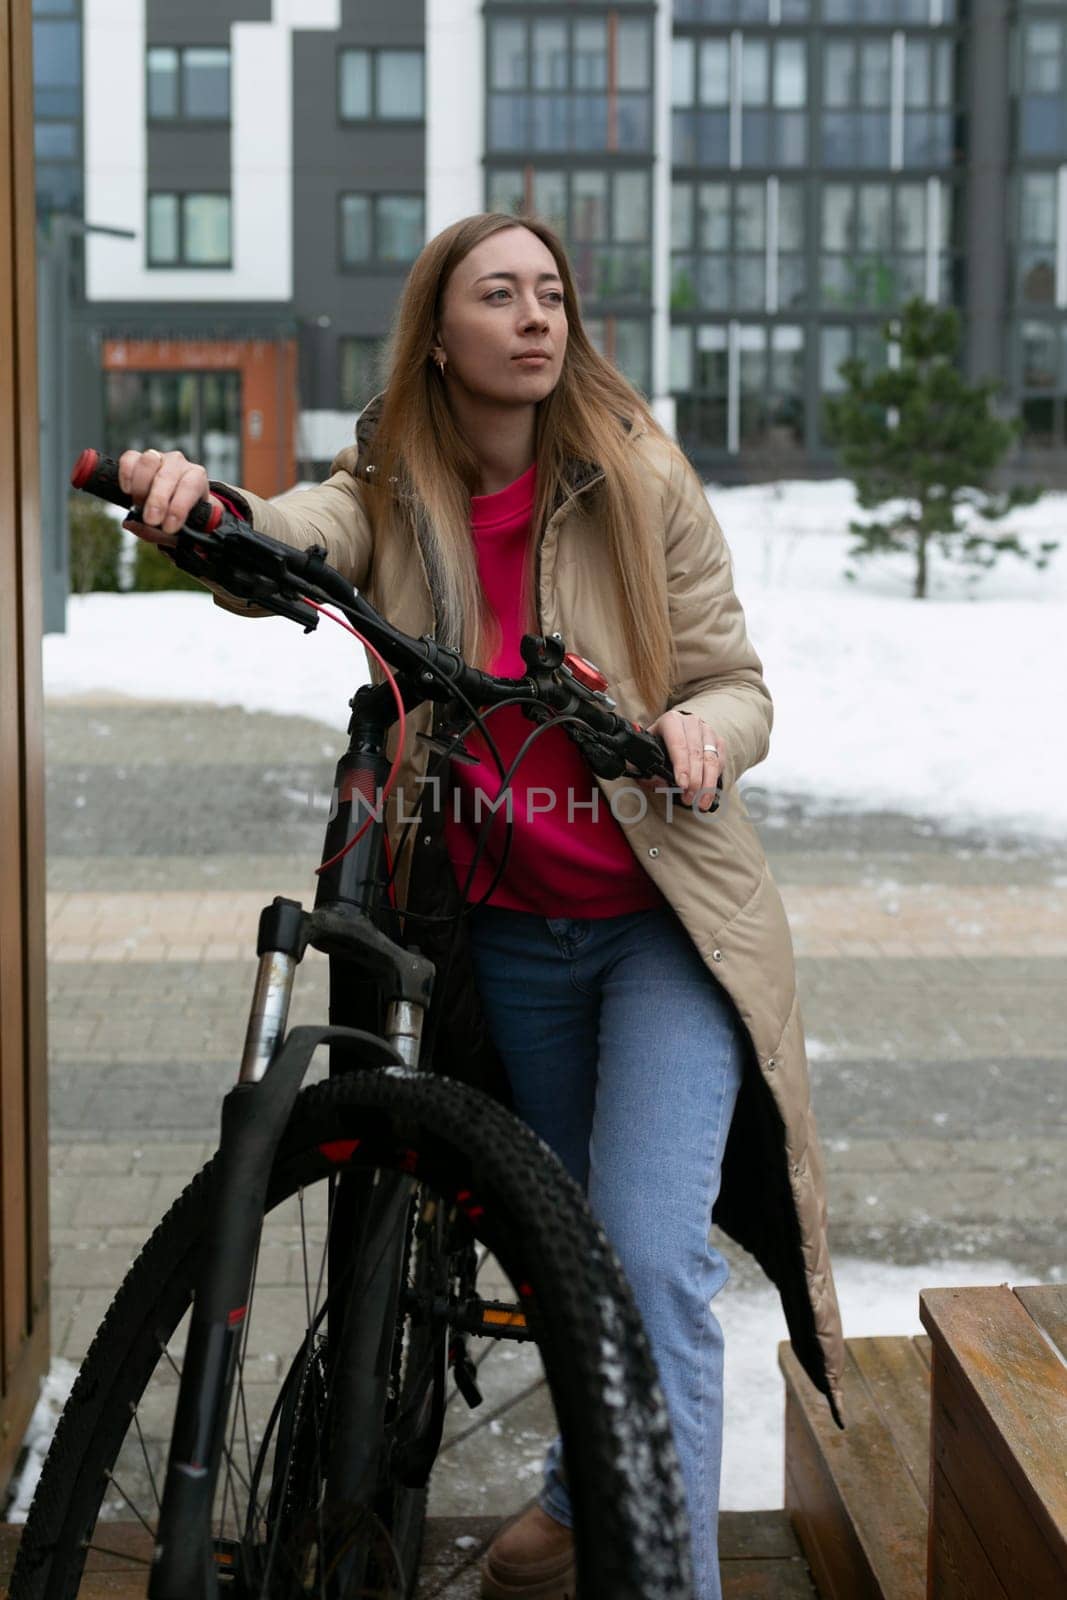 A woman in casual attire sitting on a wooden bench next to a black bicycle. The woman appears relaxed and is looking ahead. The bike is parked beside her on the pavement.